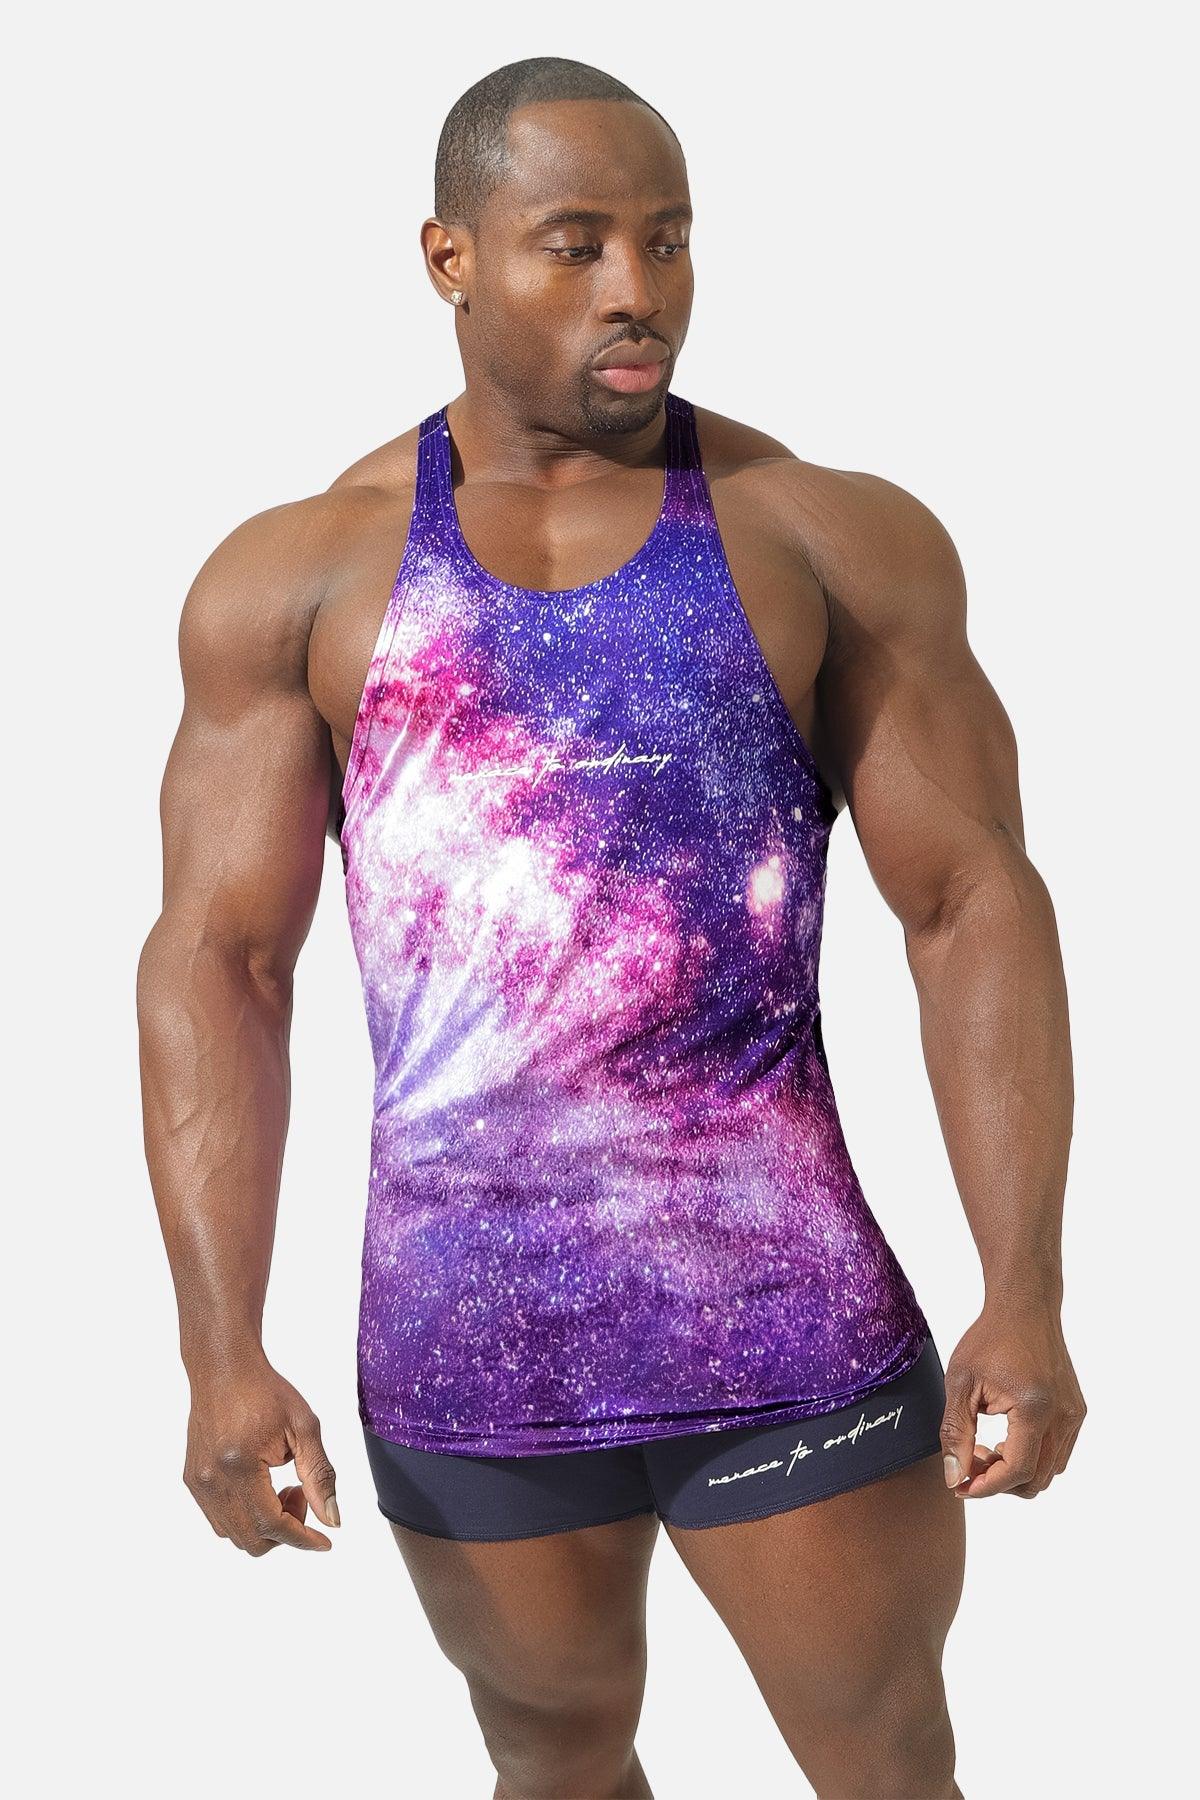 Old School Workout Stringer 2.0 - Galaxy - Jed North Canada